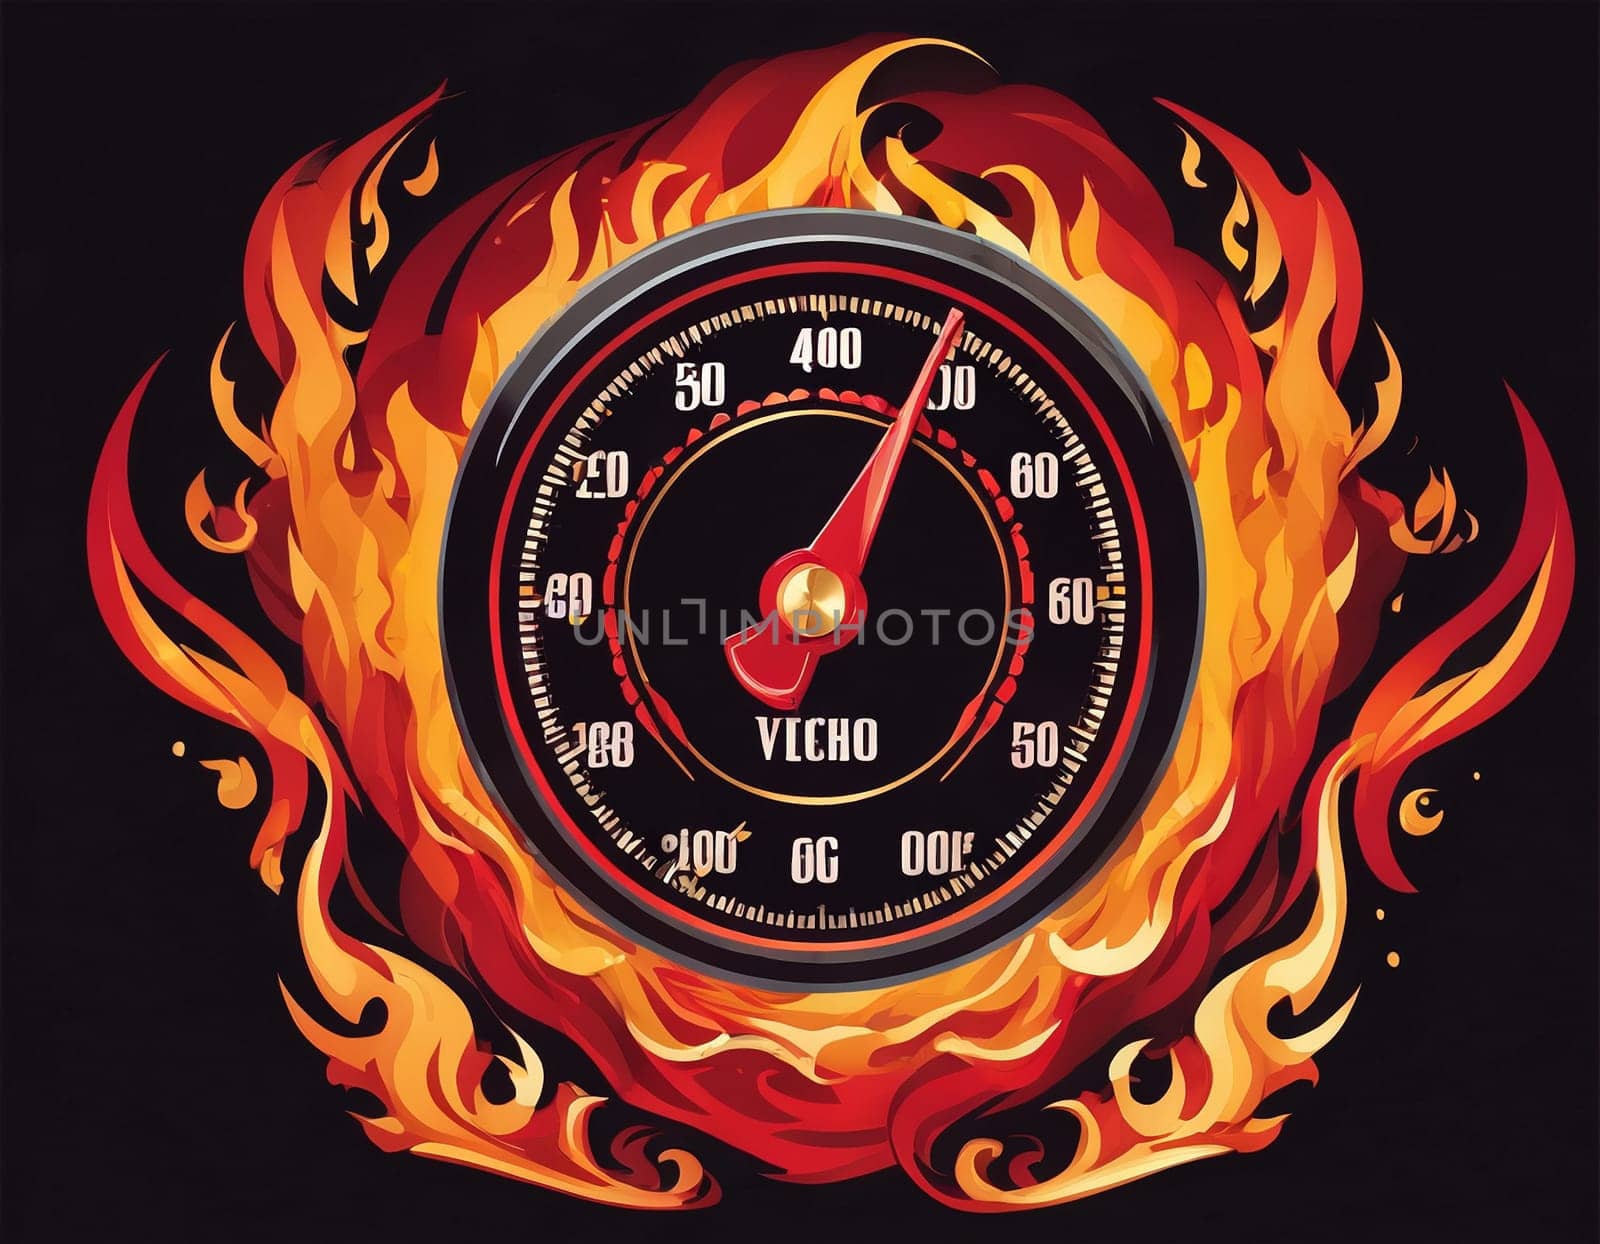 A speedometer shrouded in flames by NeuroSky